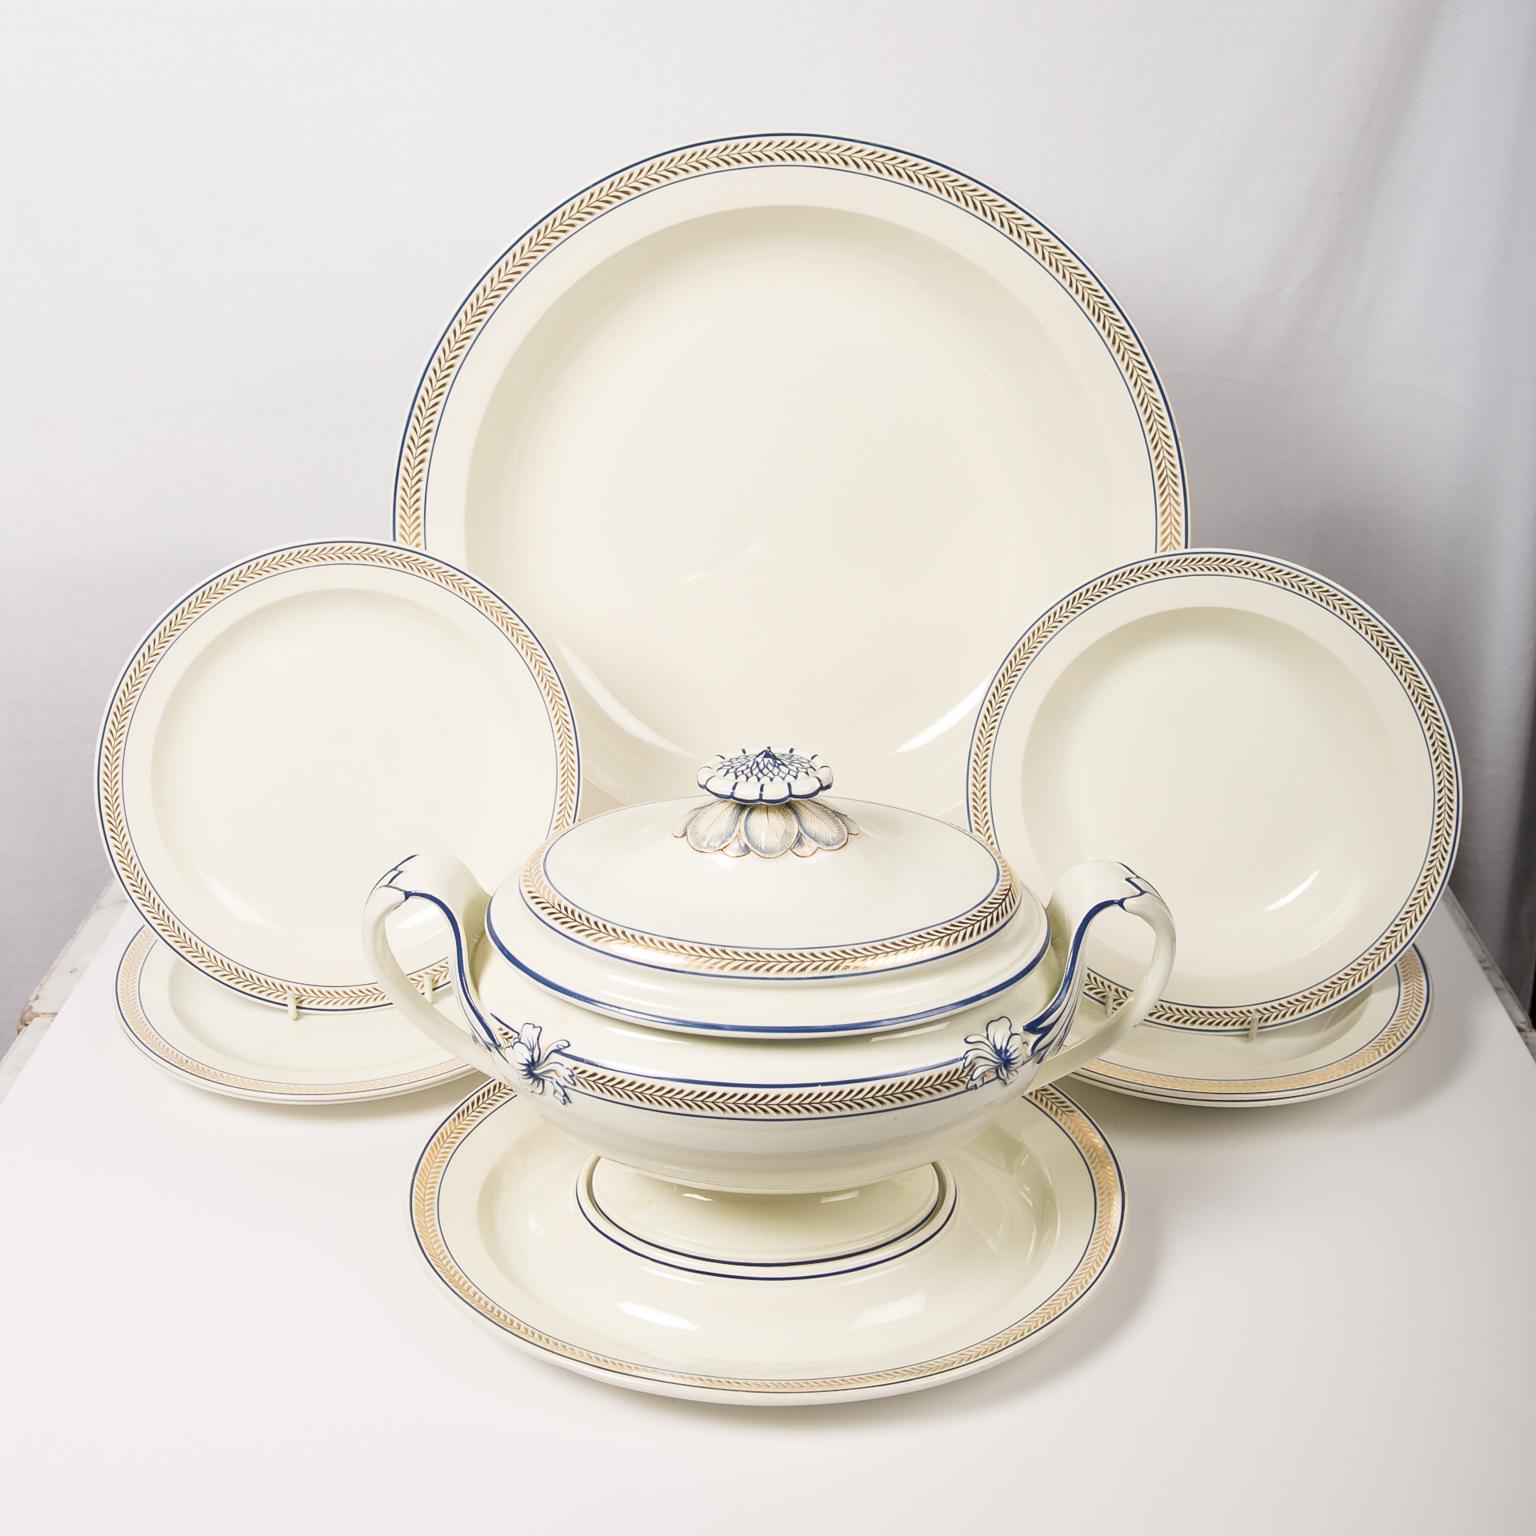 WHY WE LOVE IT: Understated yet elegant.
We are pleased to offer this large and extensive Wedgwood creamware dinner service decorated with a border featuring gold chevrons set between two enameled blue lines. This pattern was first introduced by